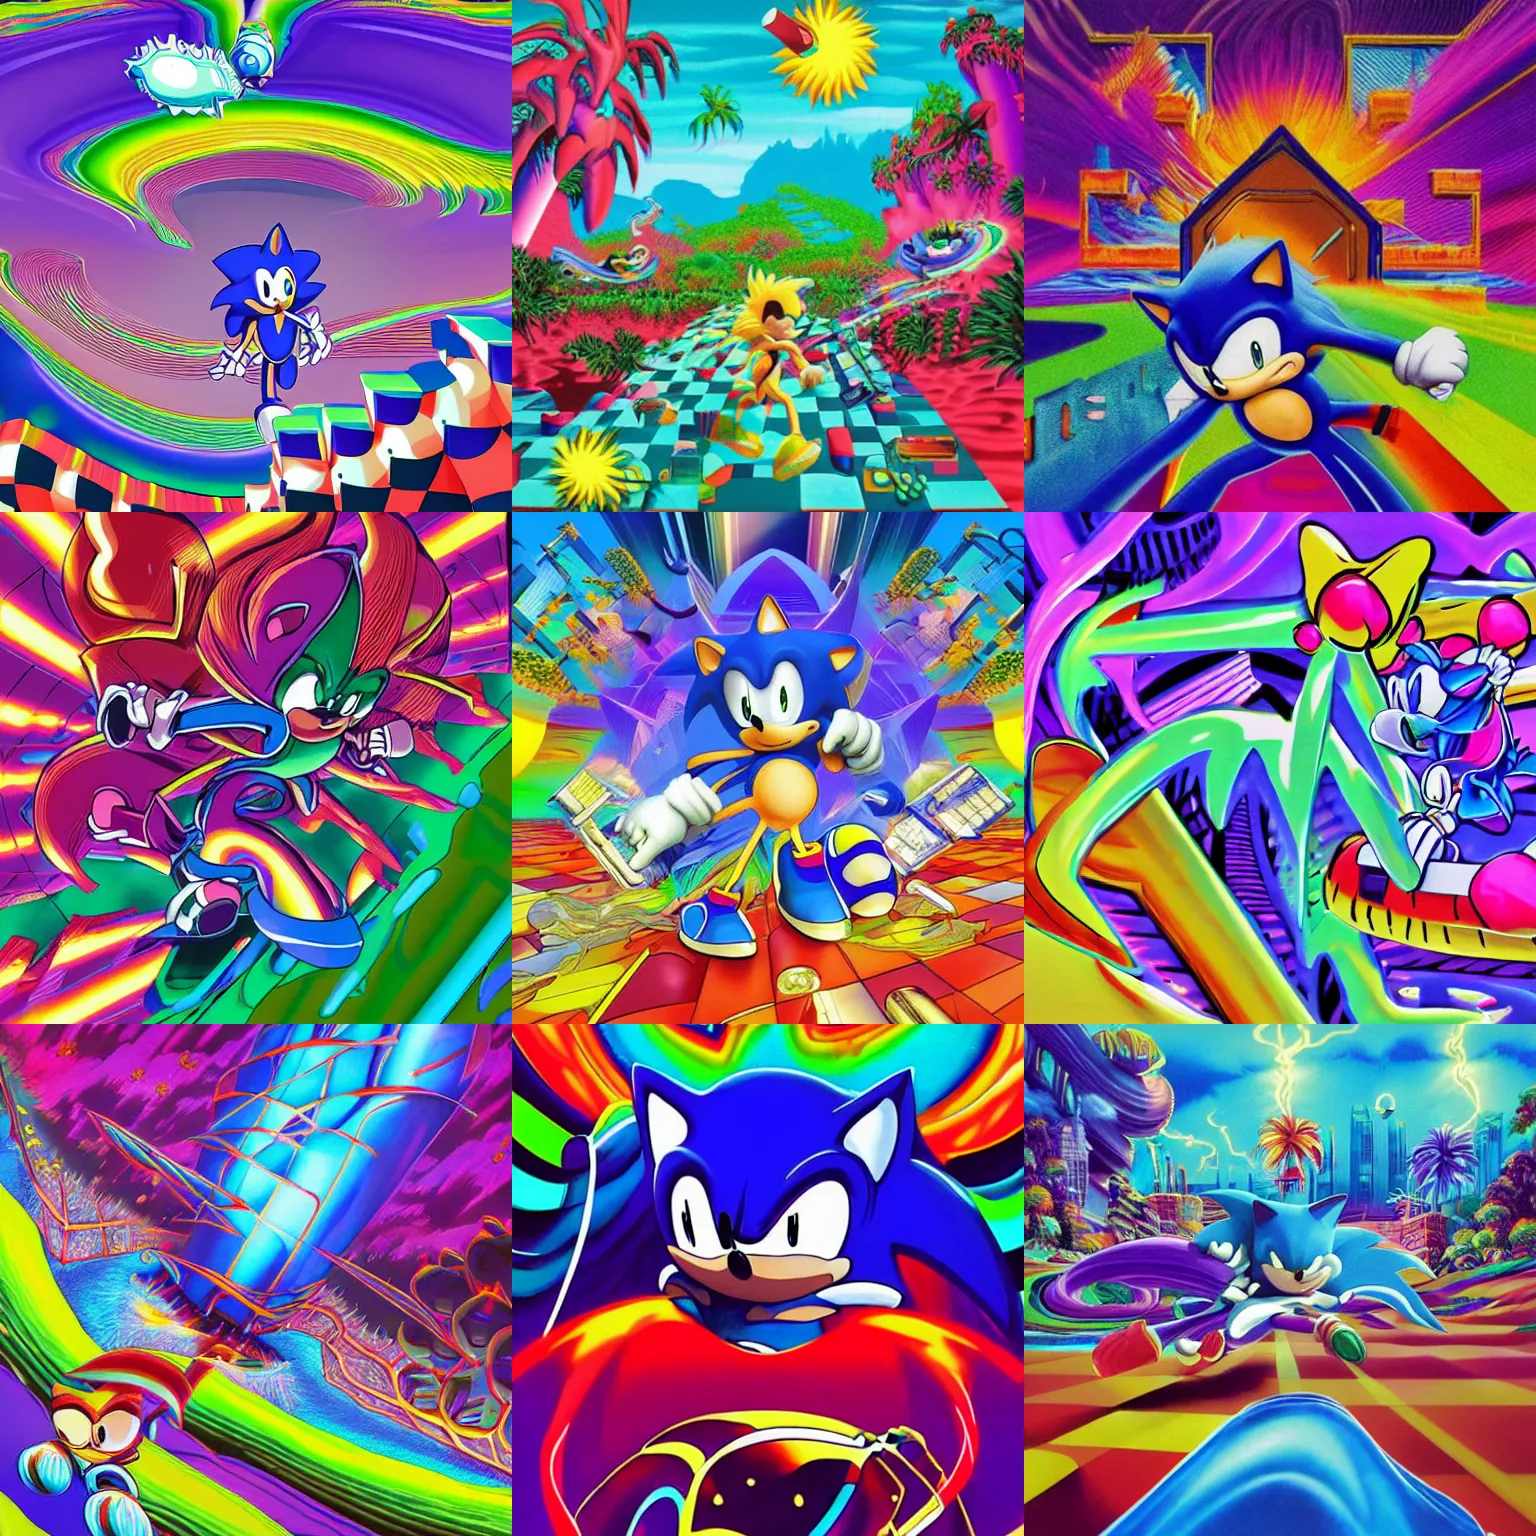 Prompt: sonic the hedgehog in a recursive surreal, sharp, detailed professional, high quality airbrush art MGMT tame impala album cover of a liquid dissolving synthwave vaporwave LSD DMT sonic the hedgehog surfing through cyberspace, purple checkerboard background, 1990s 1992 Sega Genesis video game album cover,